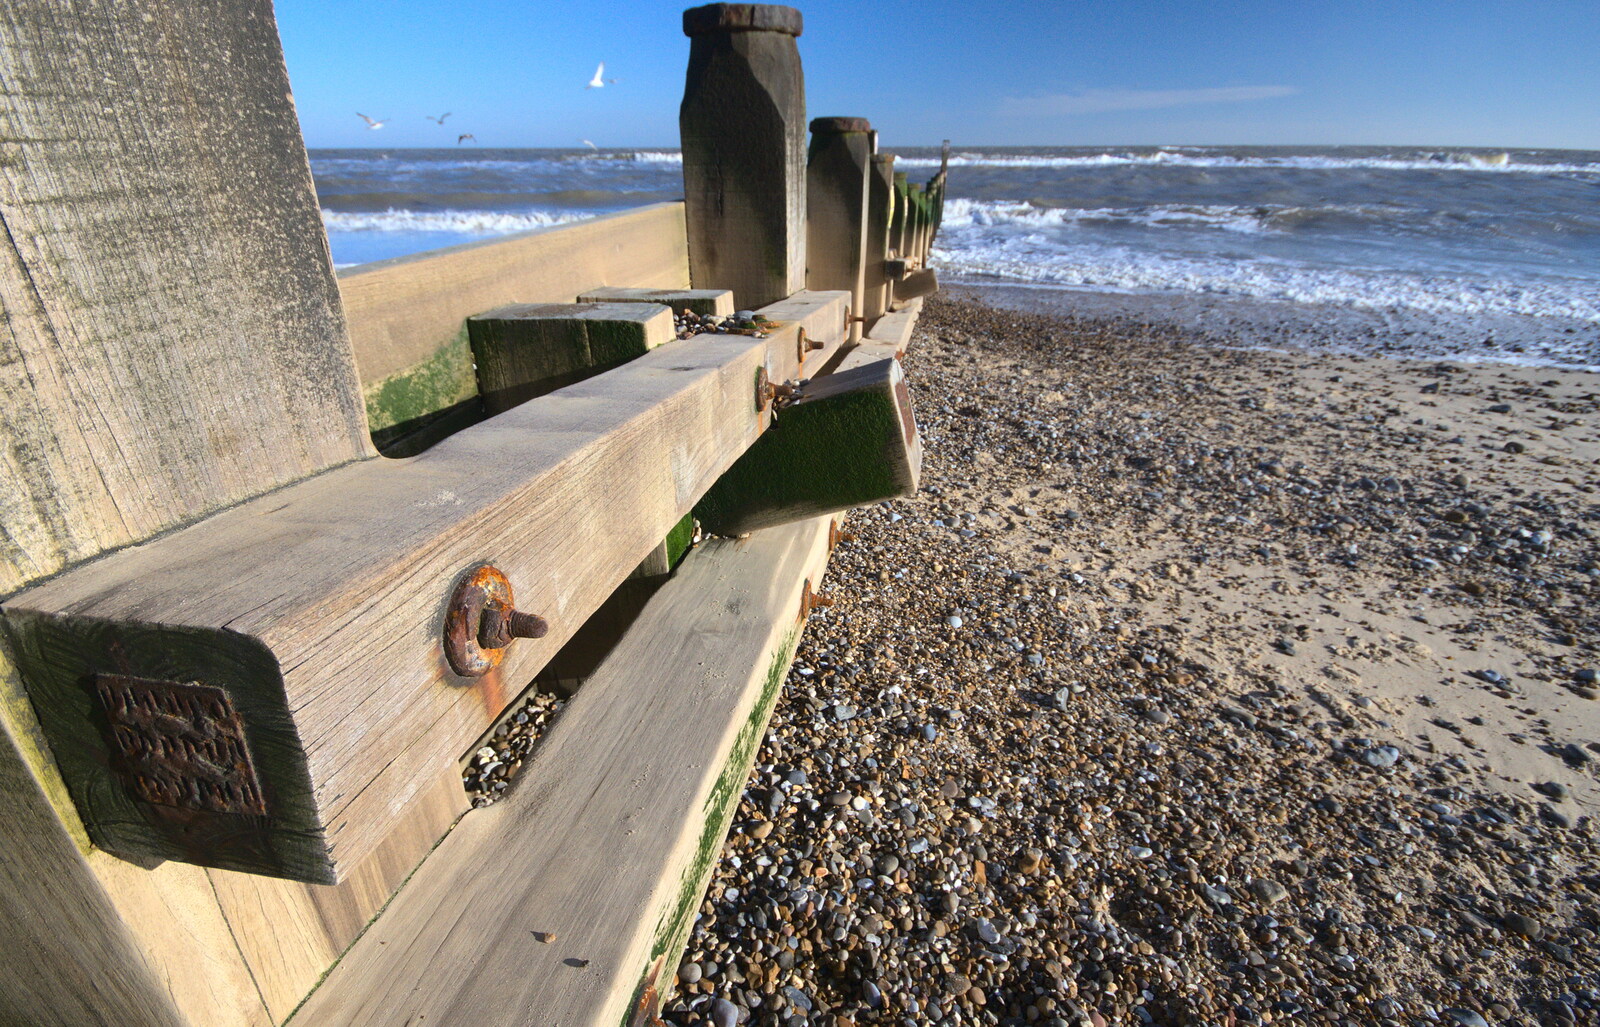 A groyne on the beach from Sunset at the Beach, Southwold, Suffolk - 18th November 2018